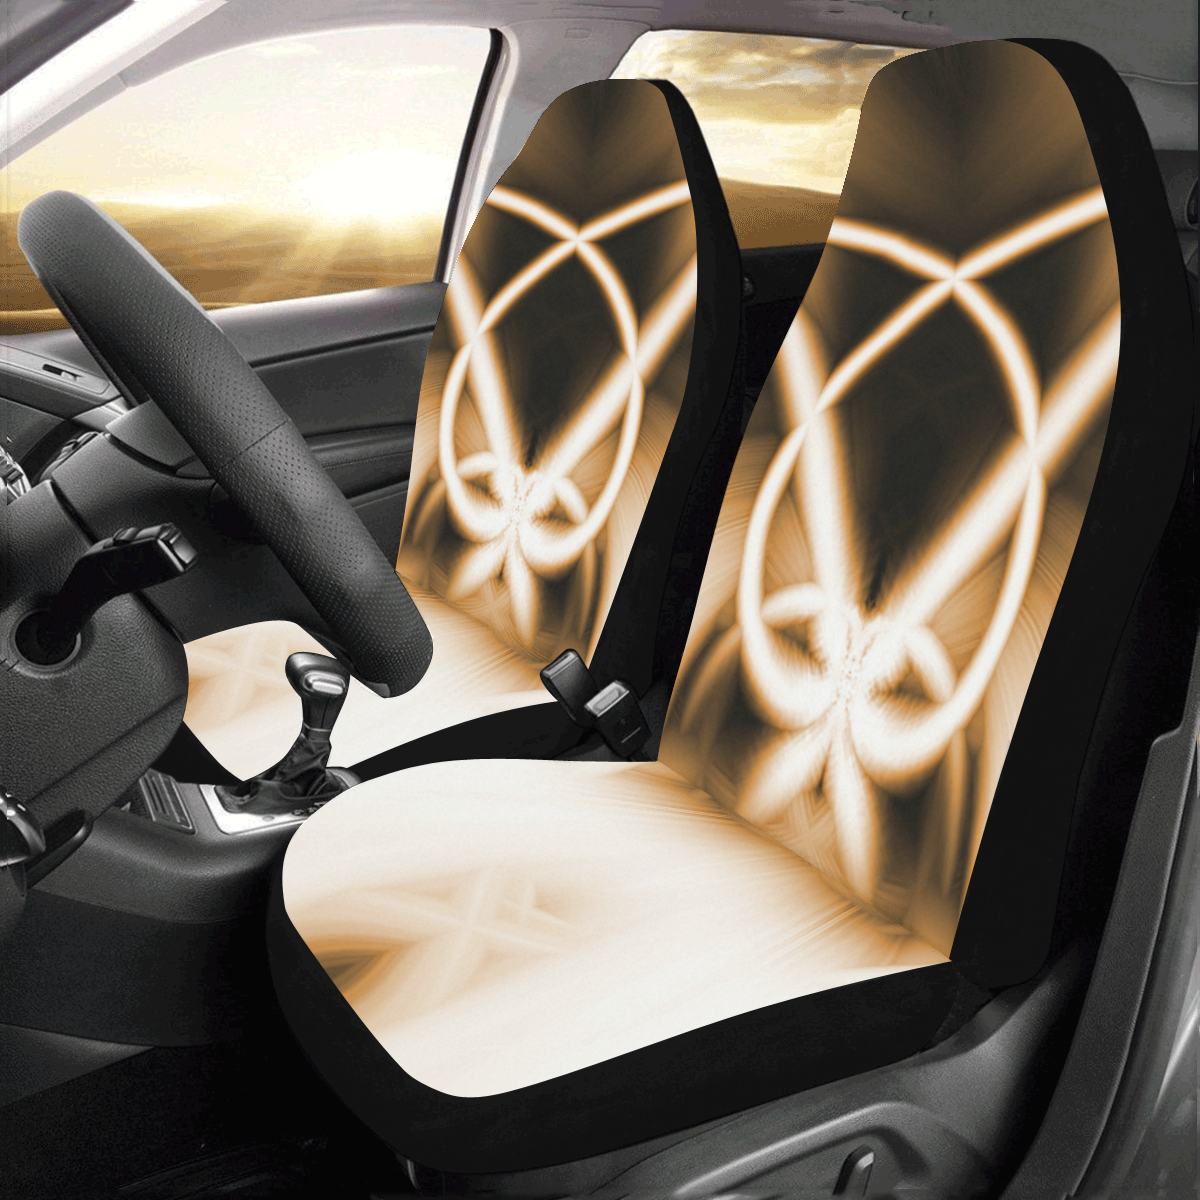 In To The Cave Car Seat Covers (Set of 2)